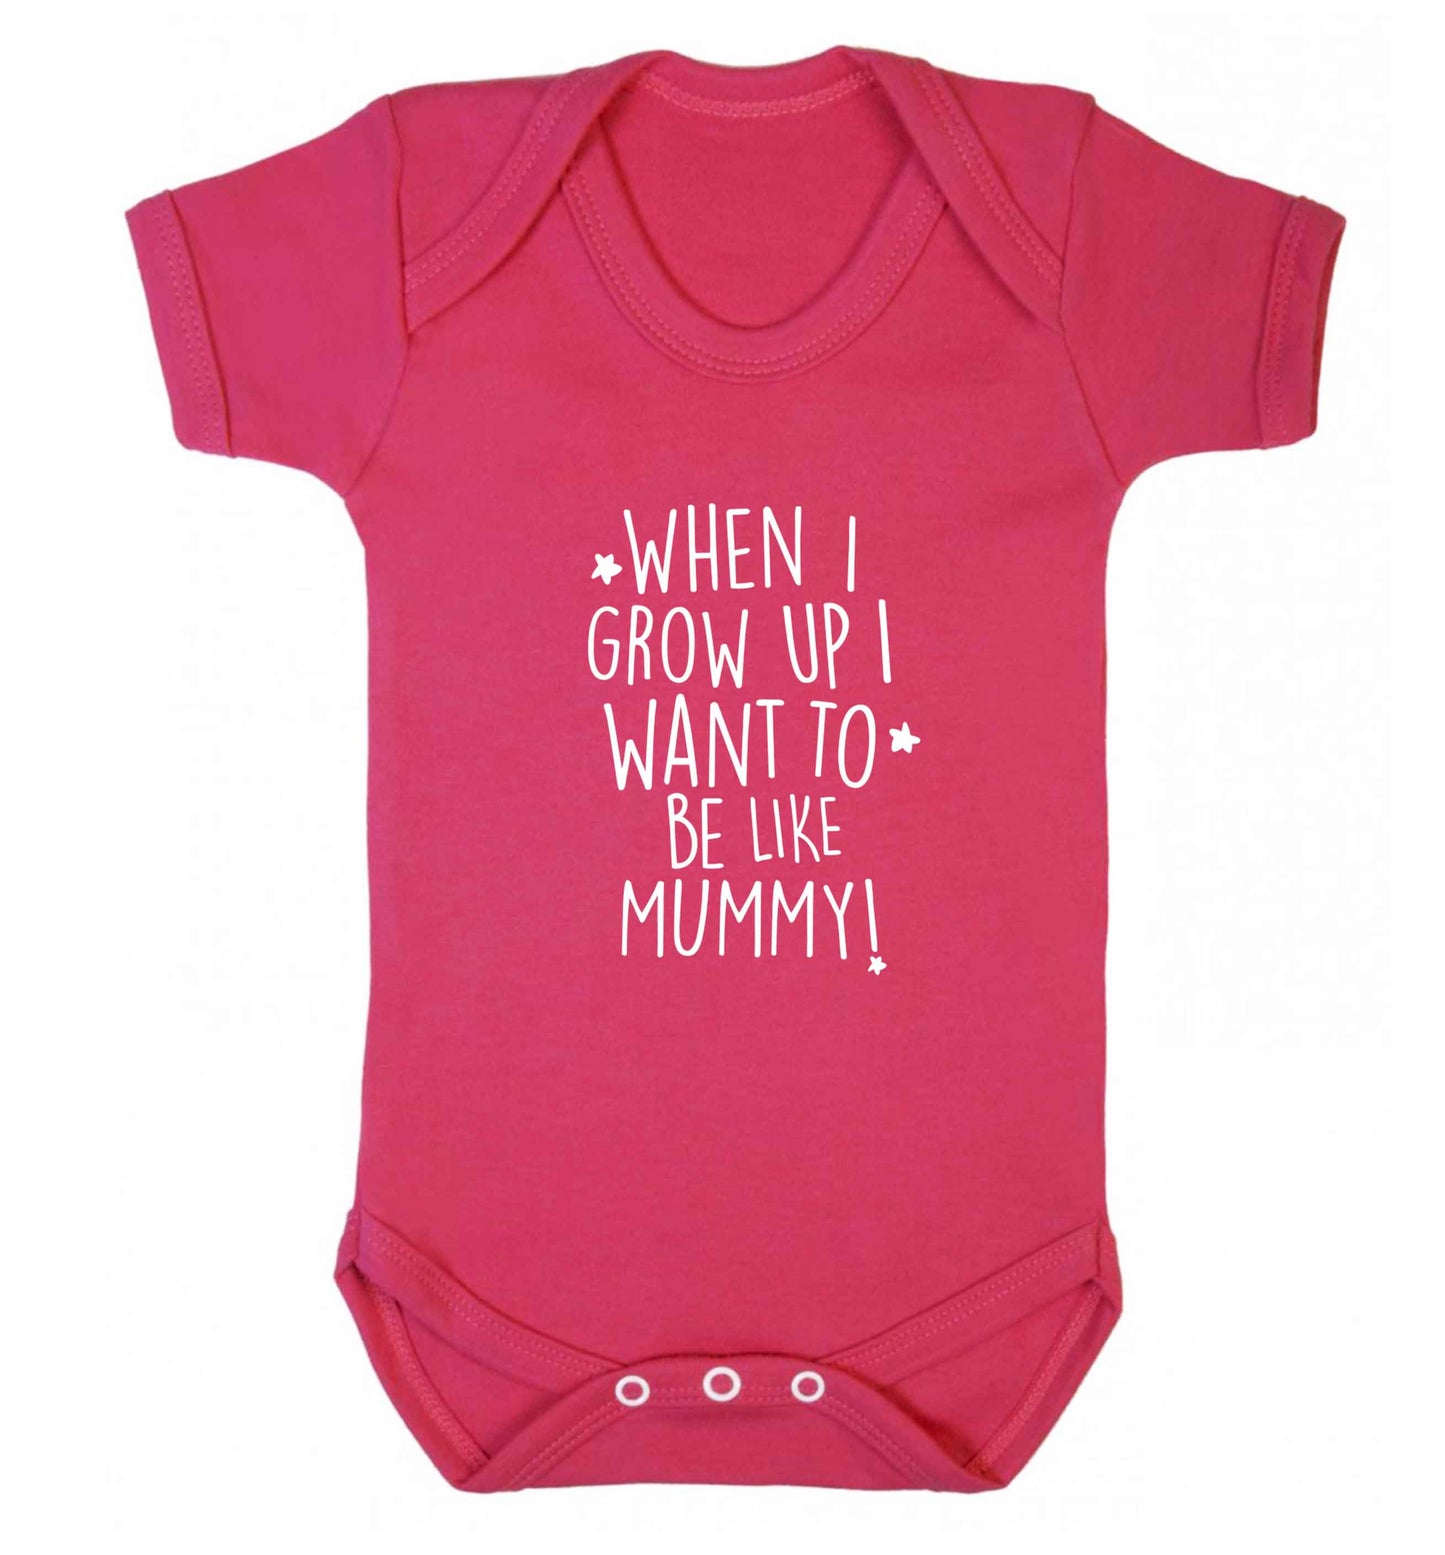 When I grow up I want to be like my mummy baby vest dark pink 18-24 months